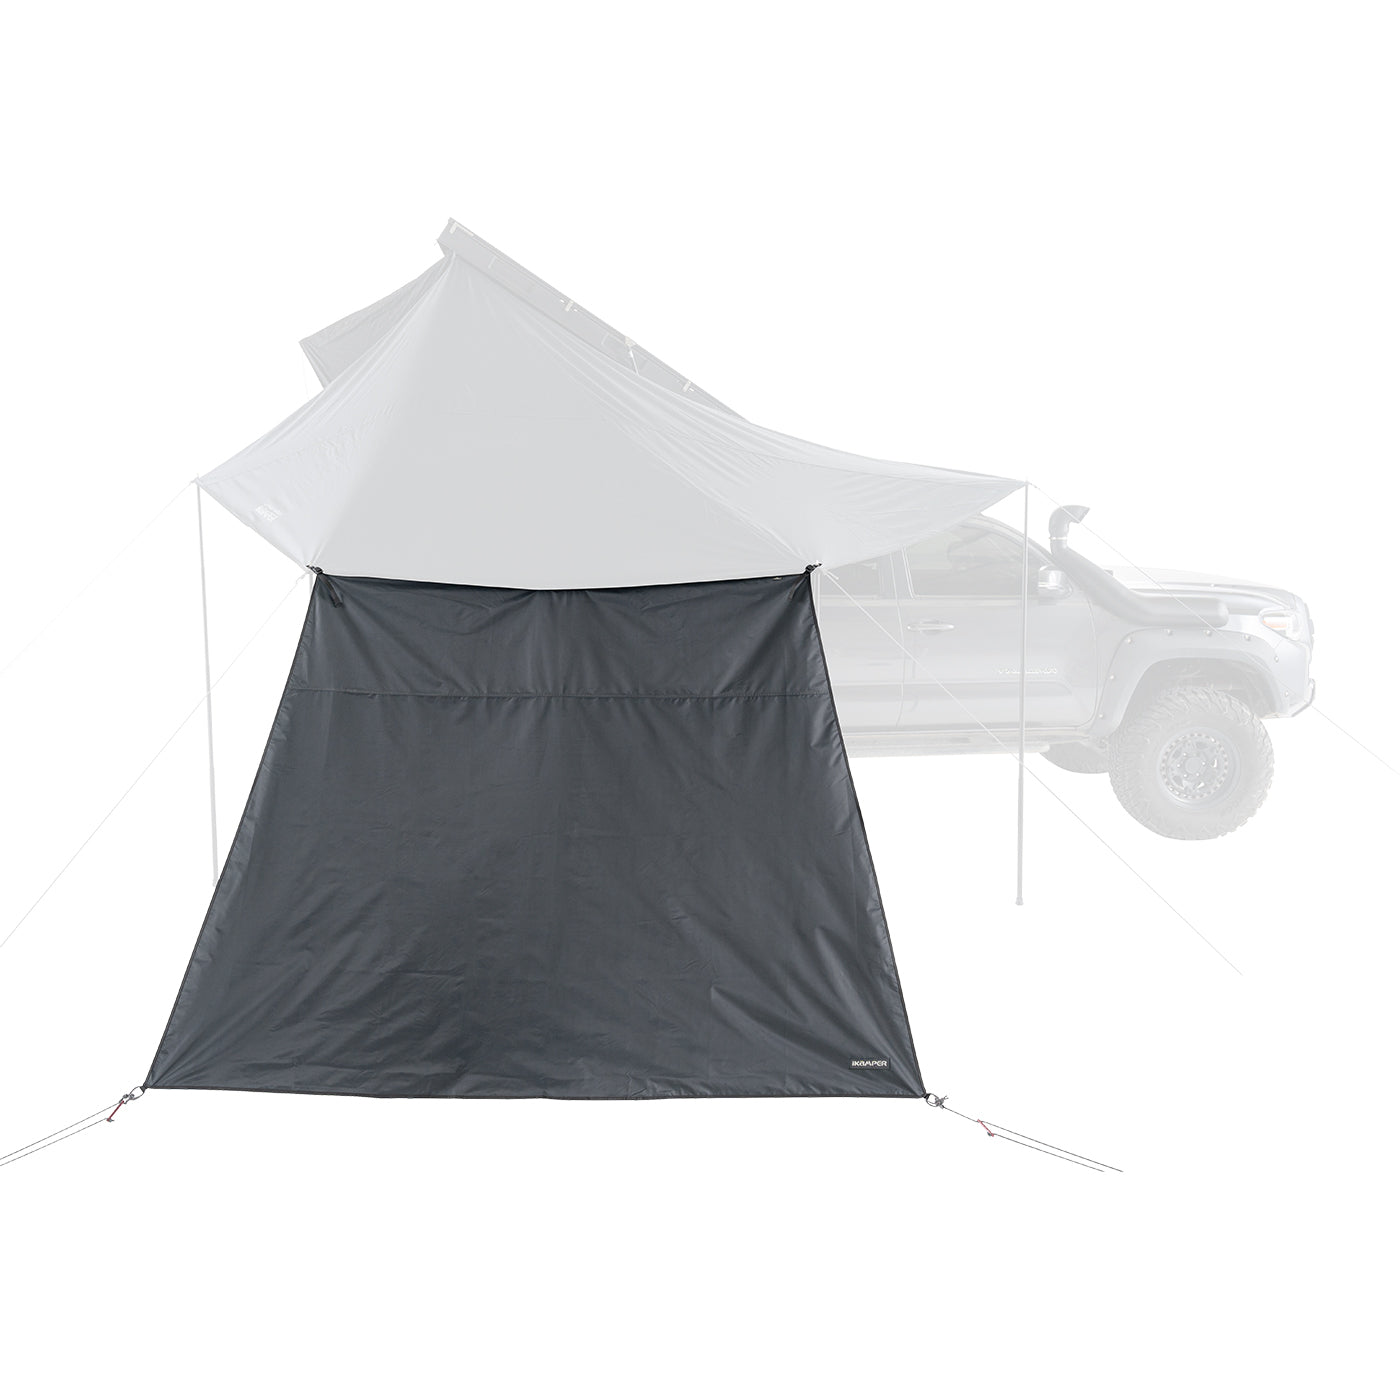 Awning 3.0 Canopy